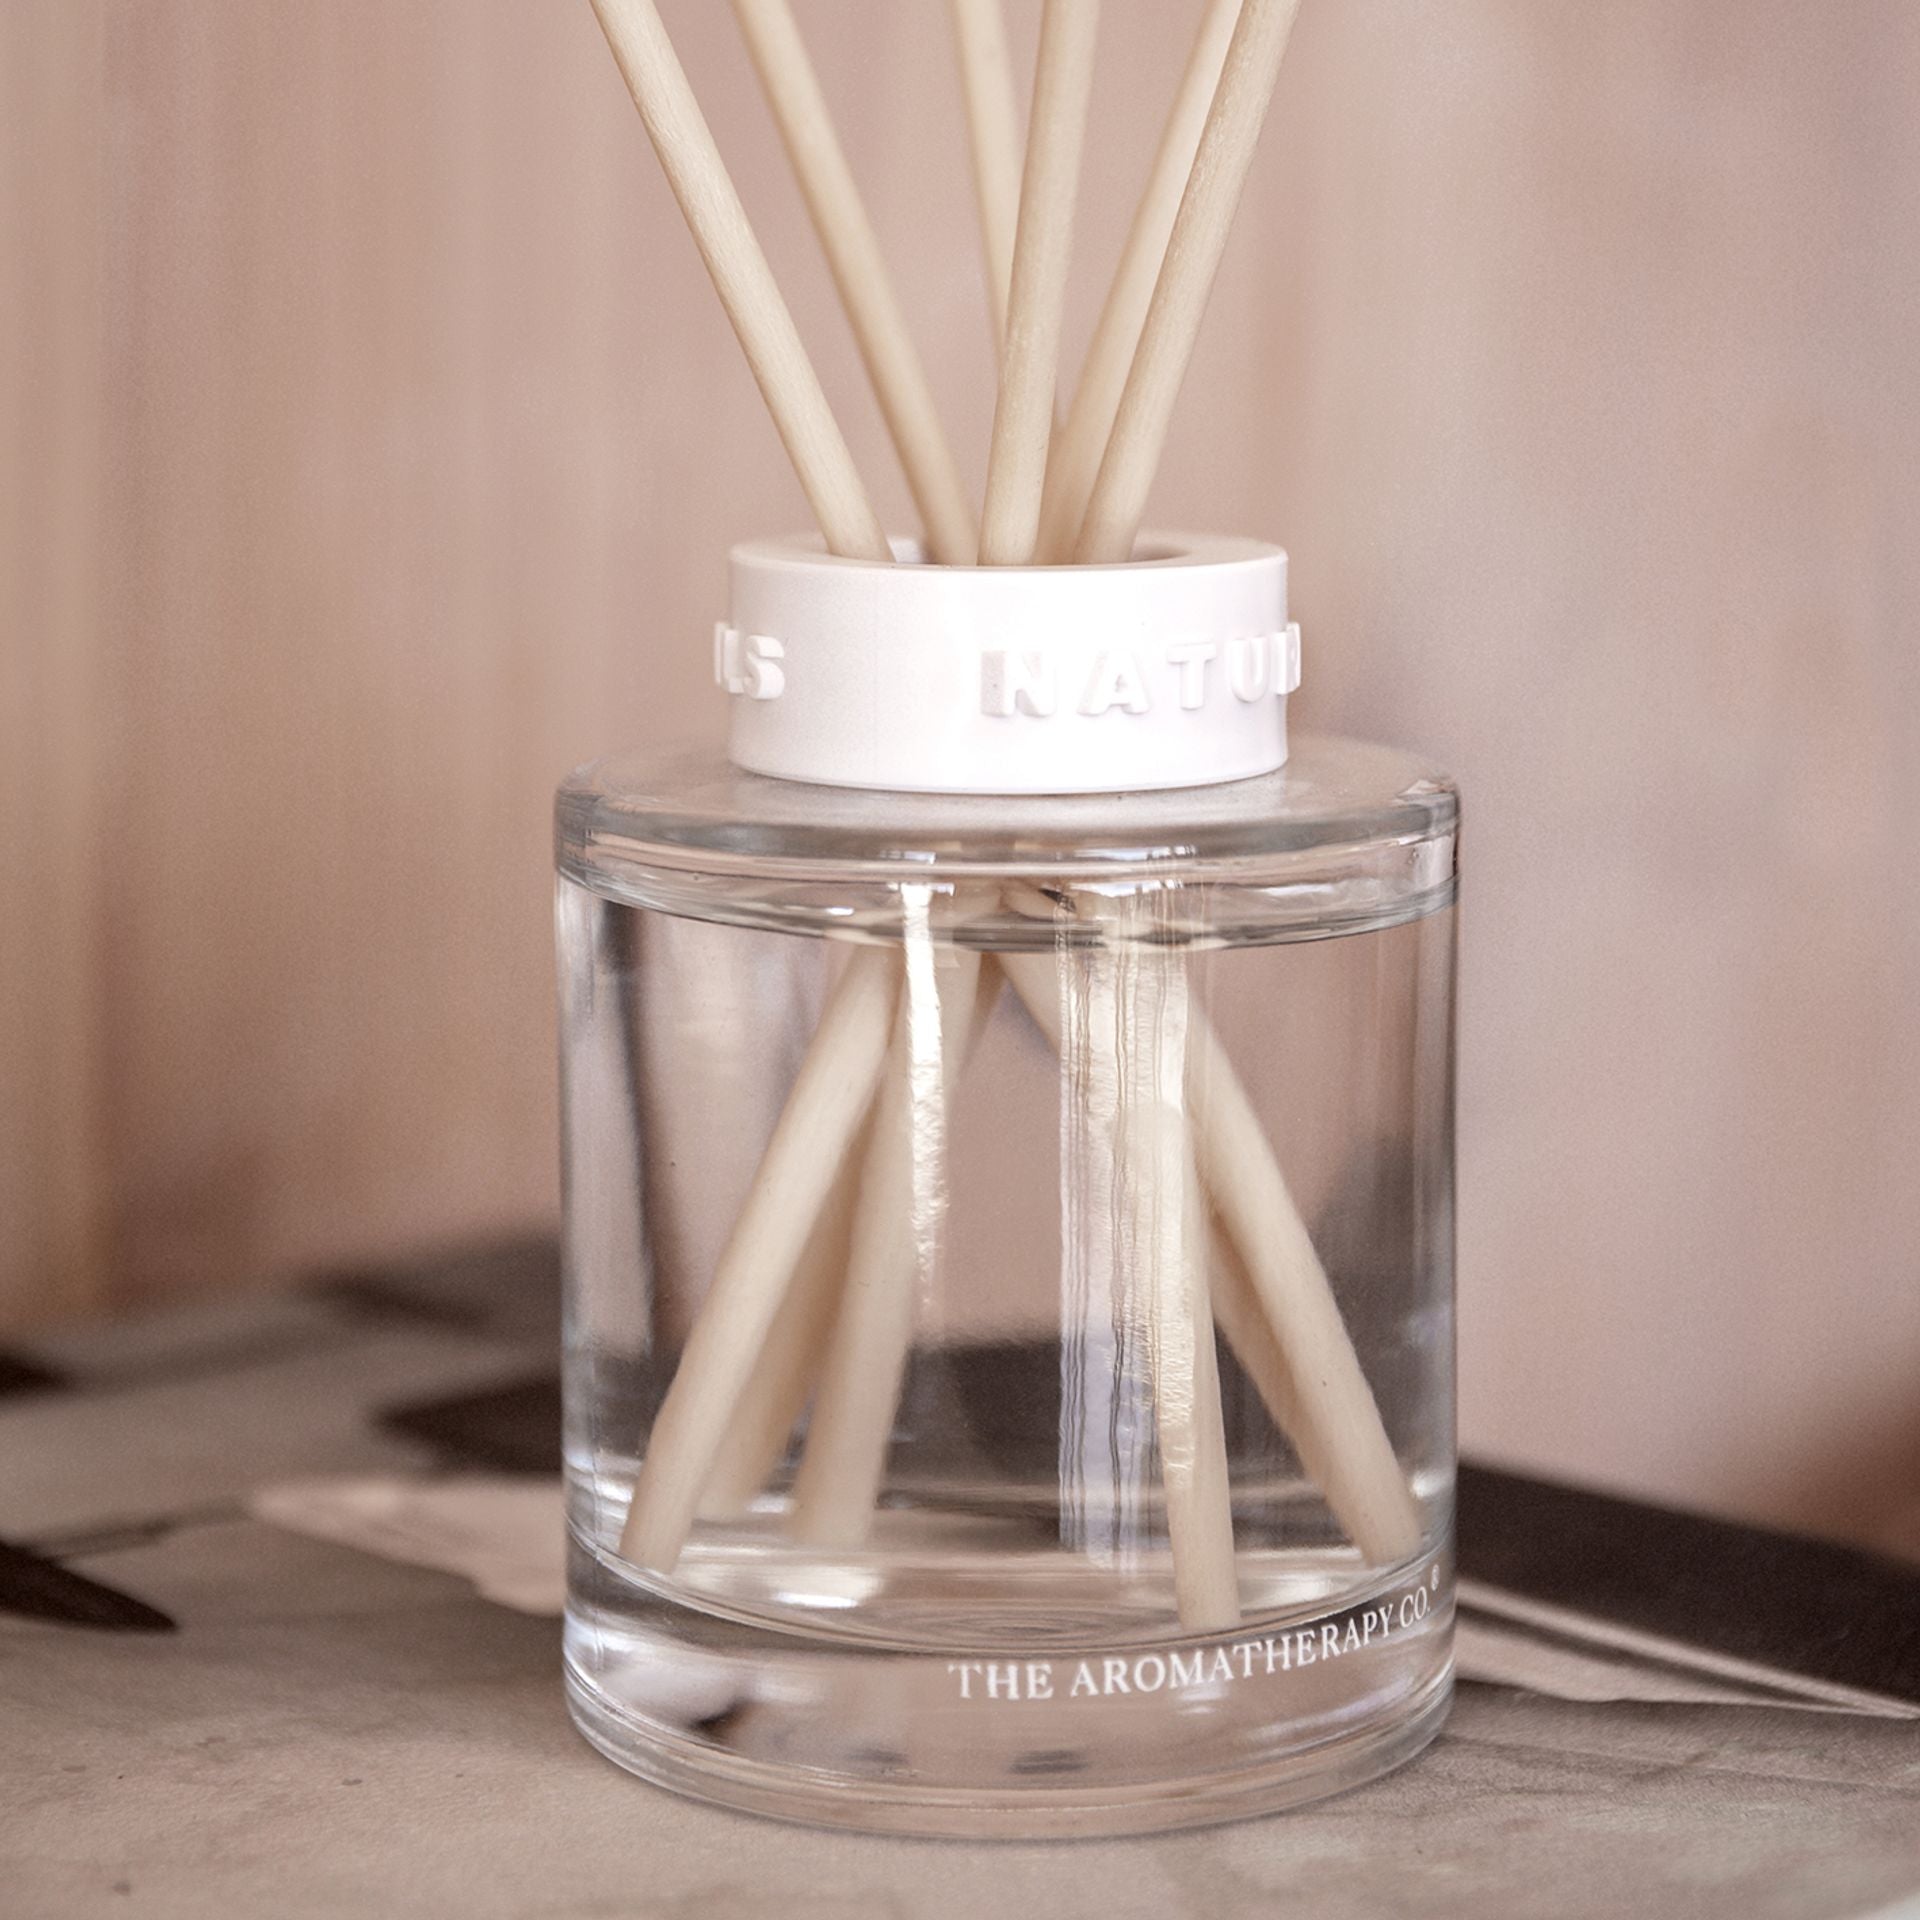 The Aromatherapy Co Naturals Rose Jasmine & Oud Diffuser